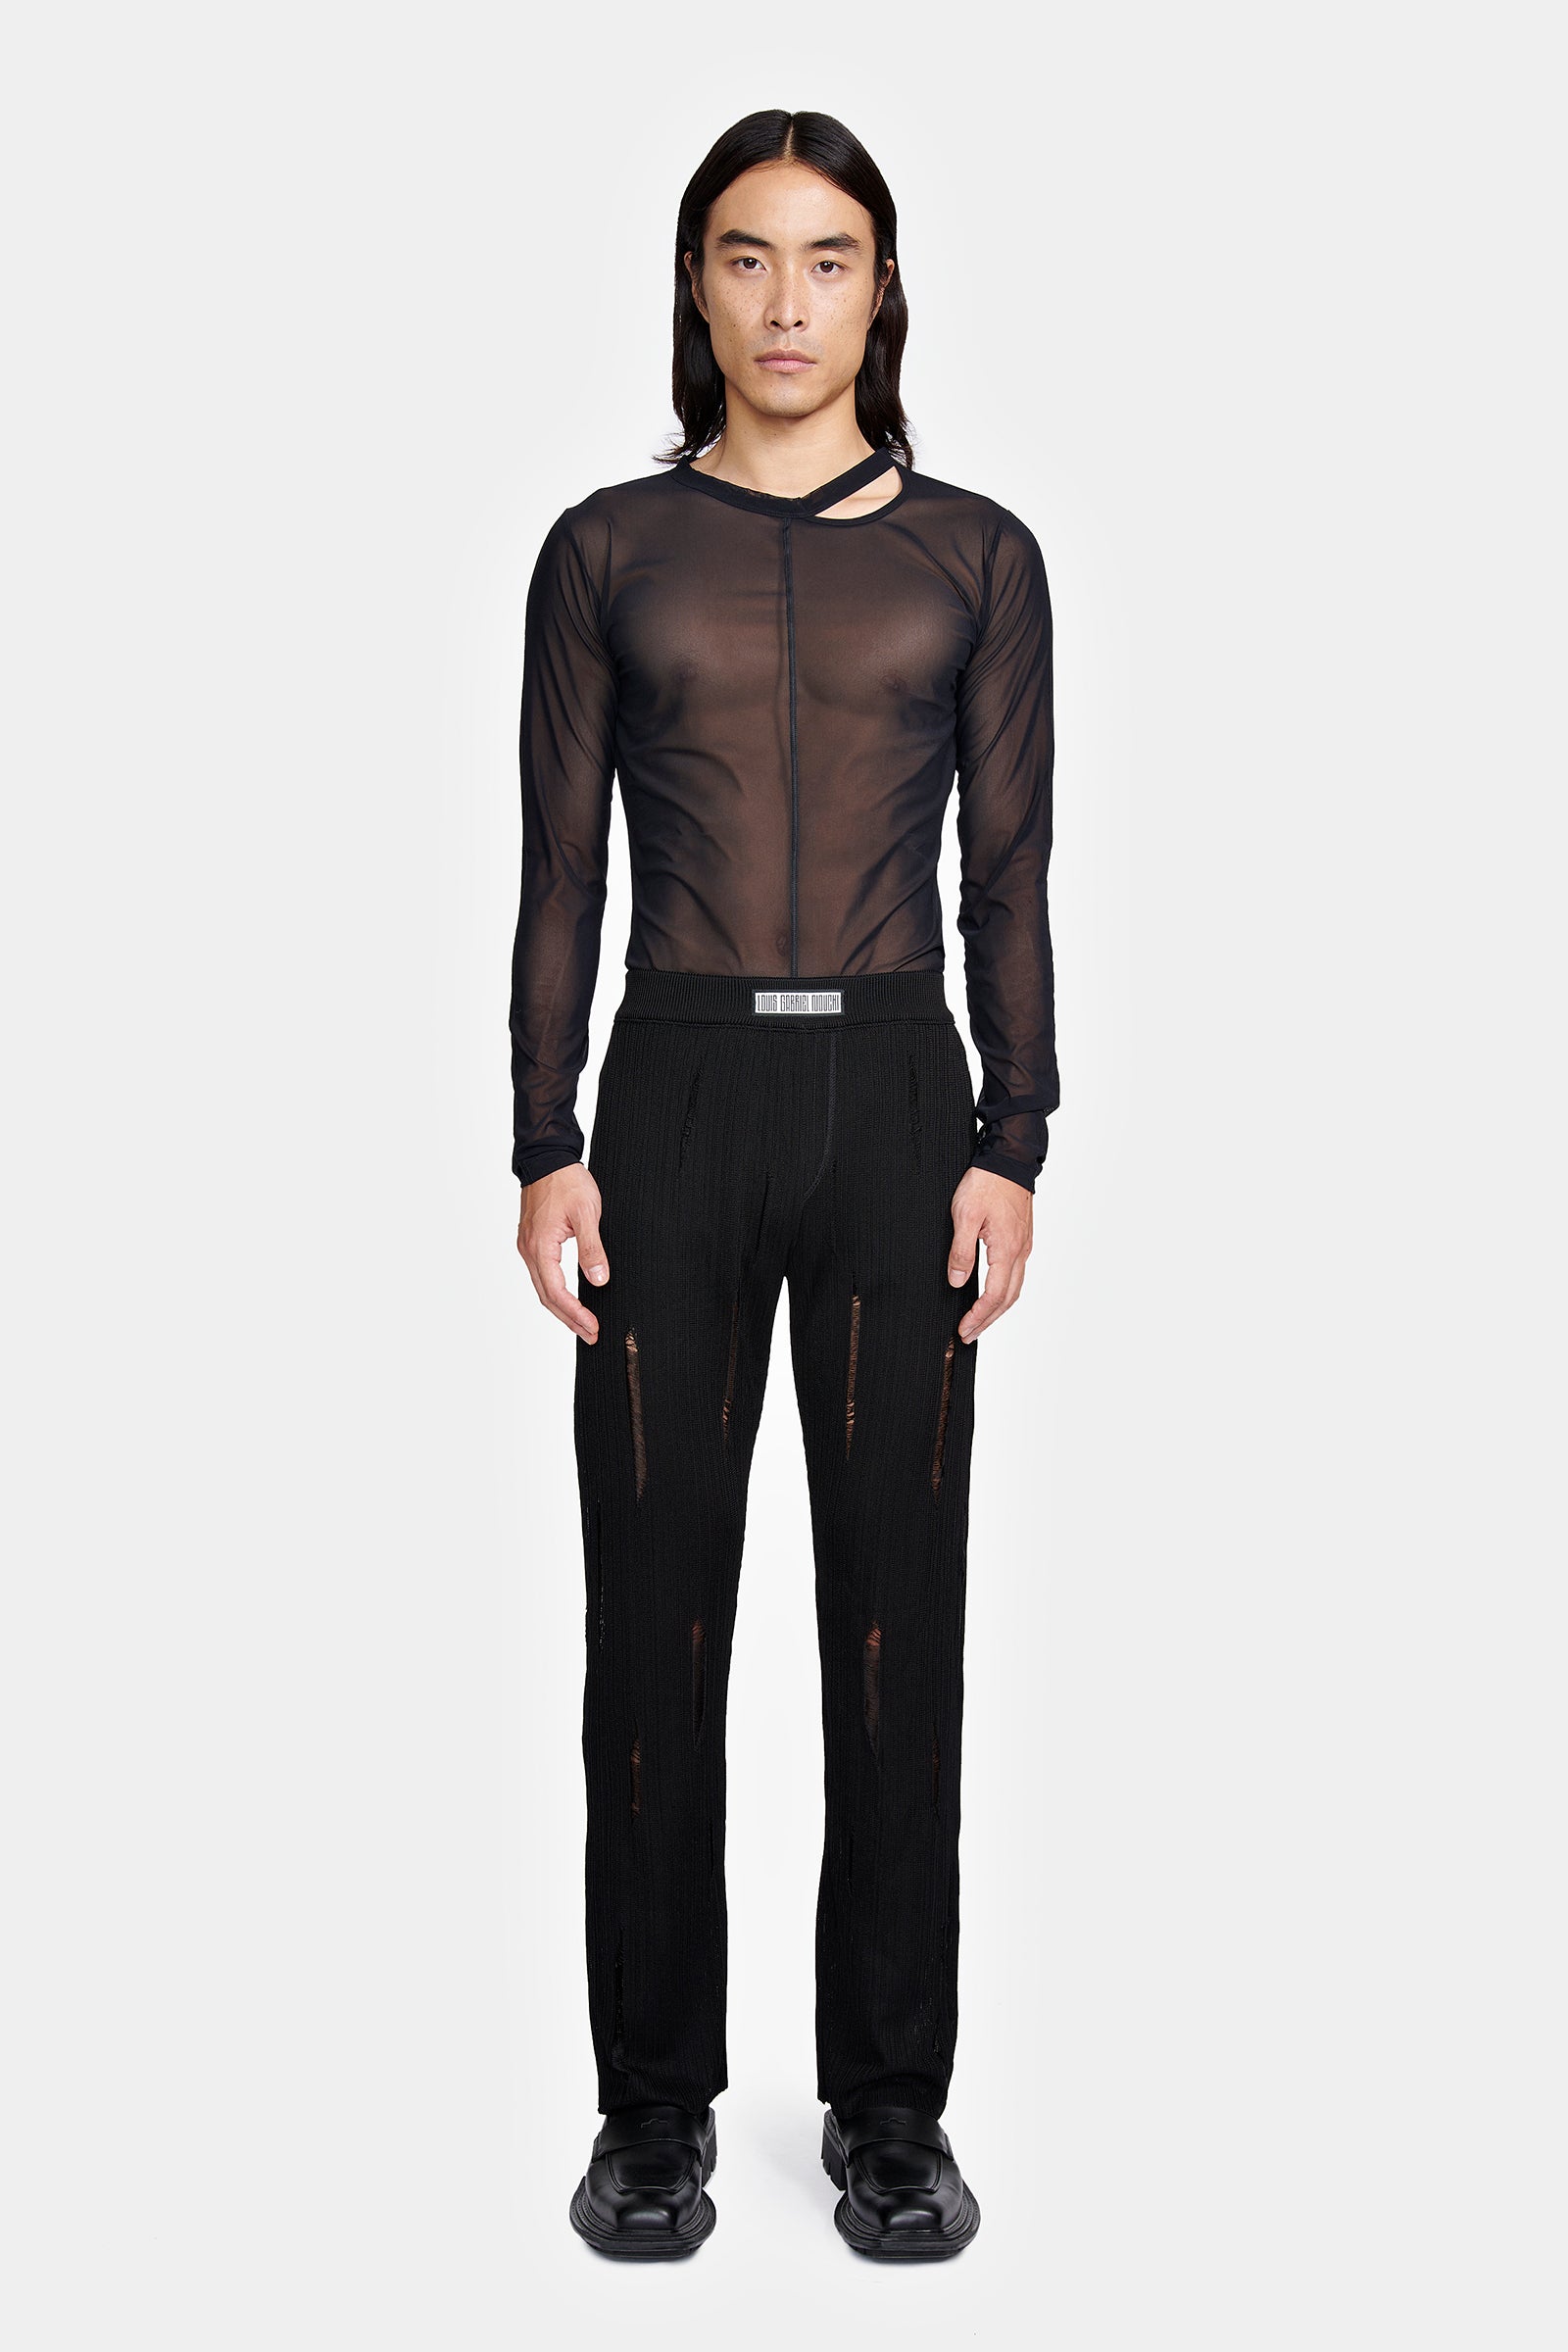 Flared Trousers with Elasticized Waistband